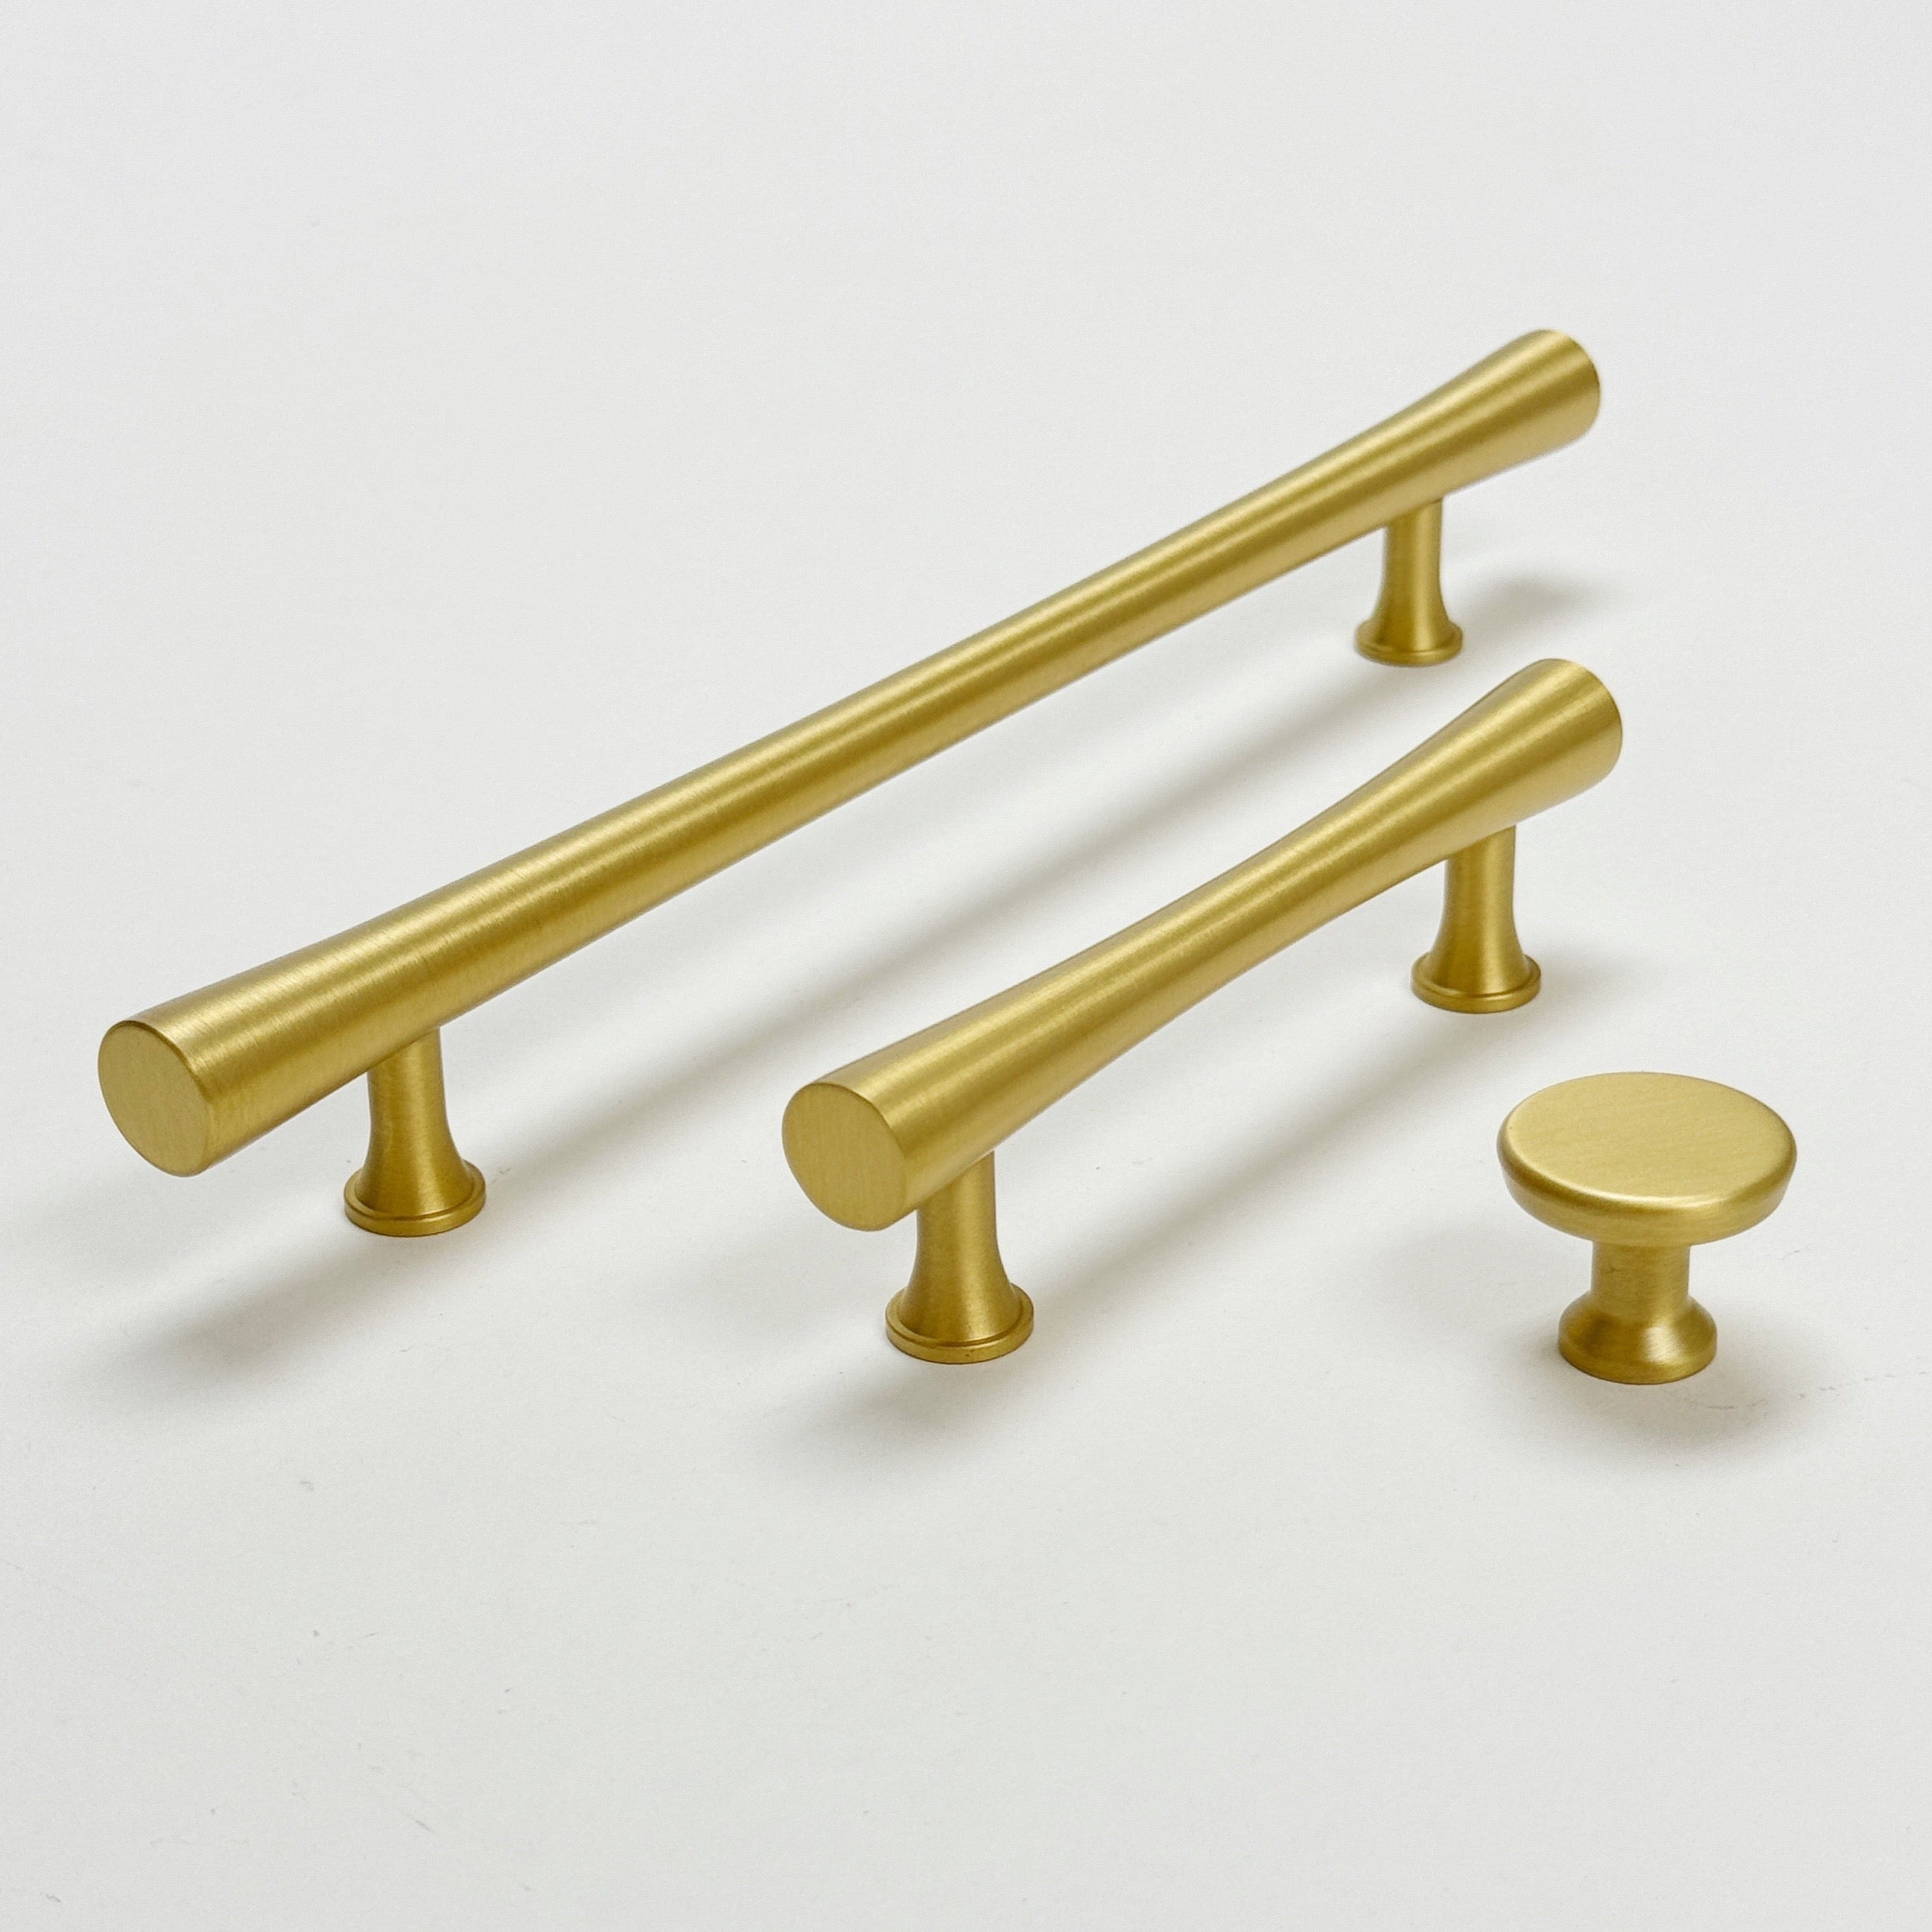 Satin Brass Cabinet Hardware "Collin" Drawer Pulls and Cabinet Knobs - Forge Hardware Studio